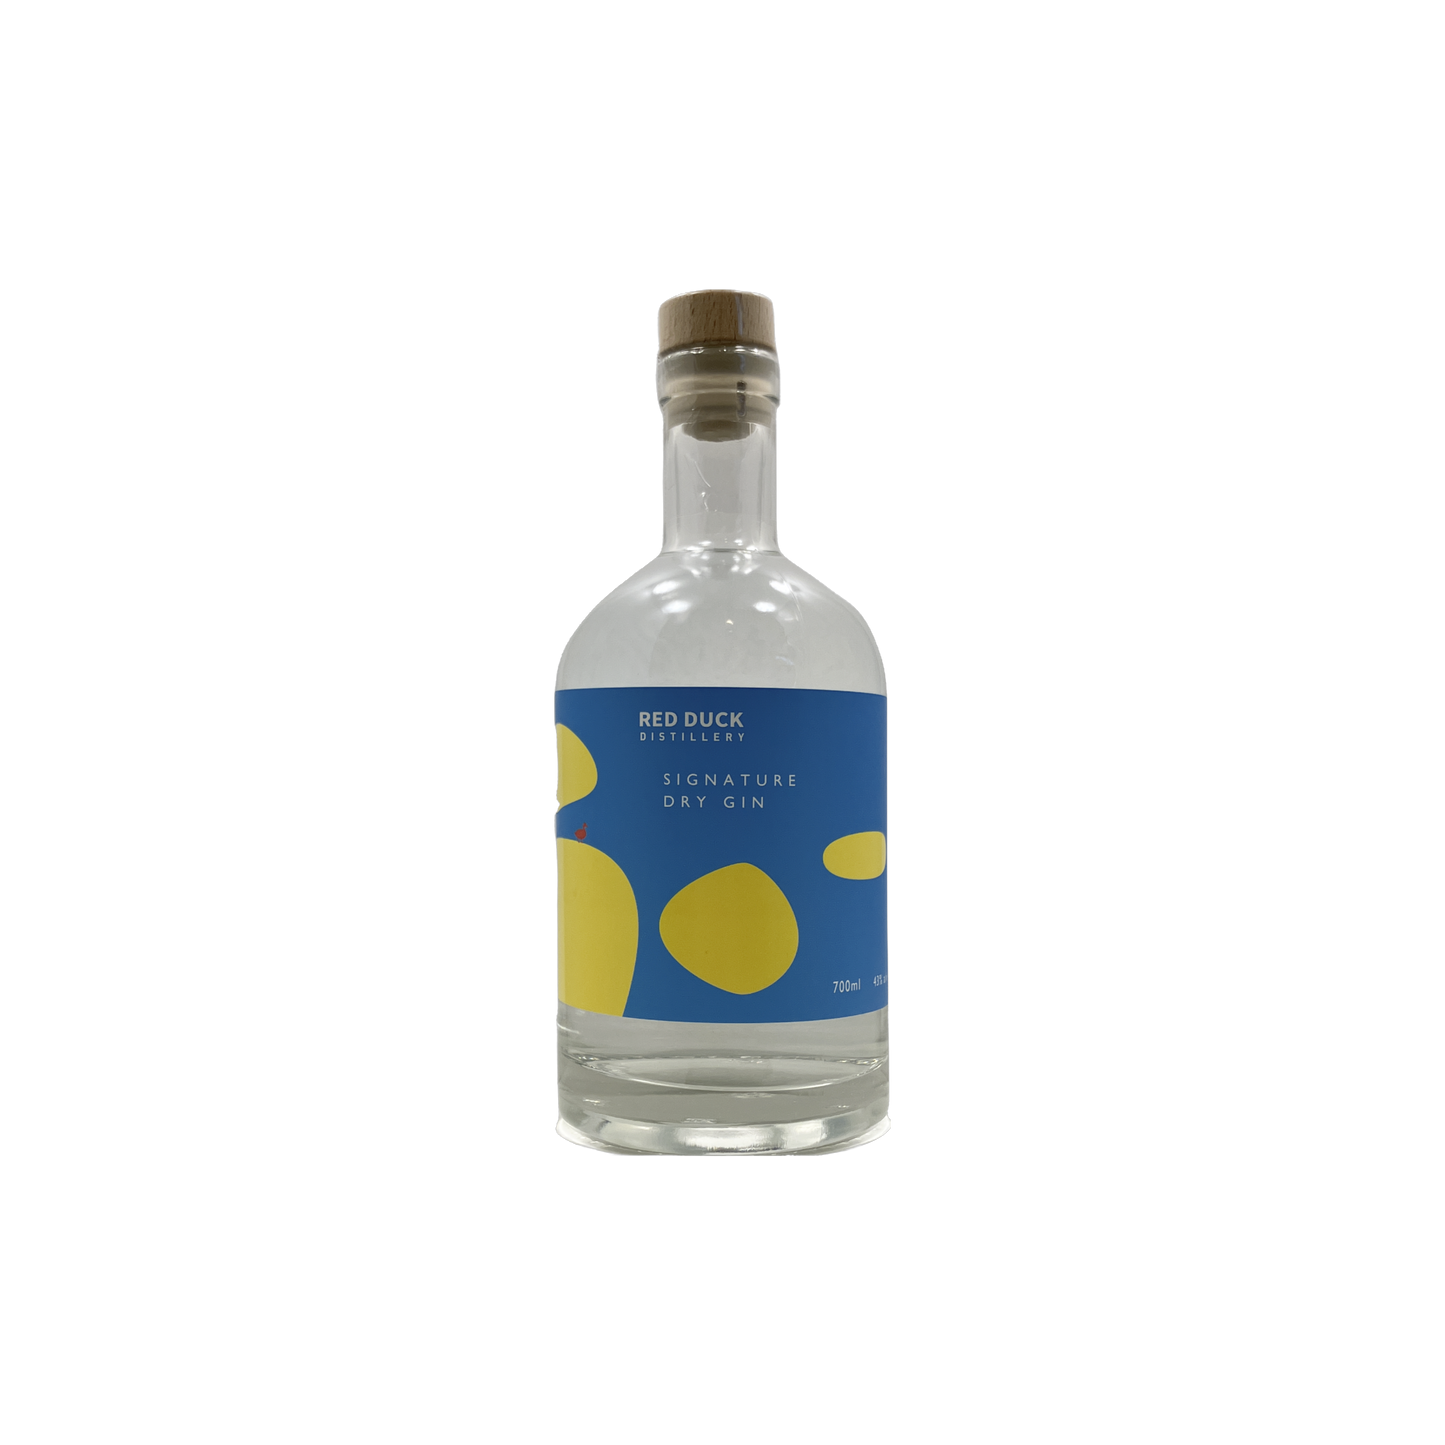 Red Duck Signature Dry Gin 700ml